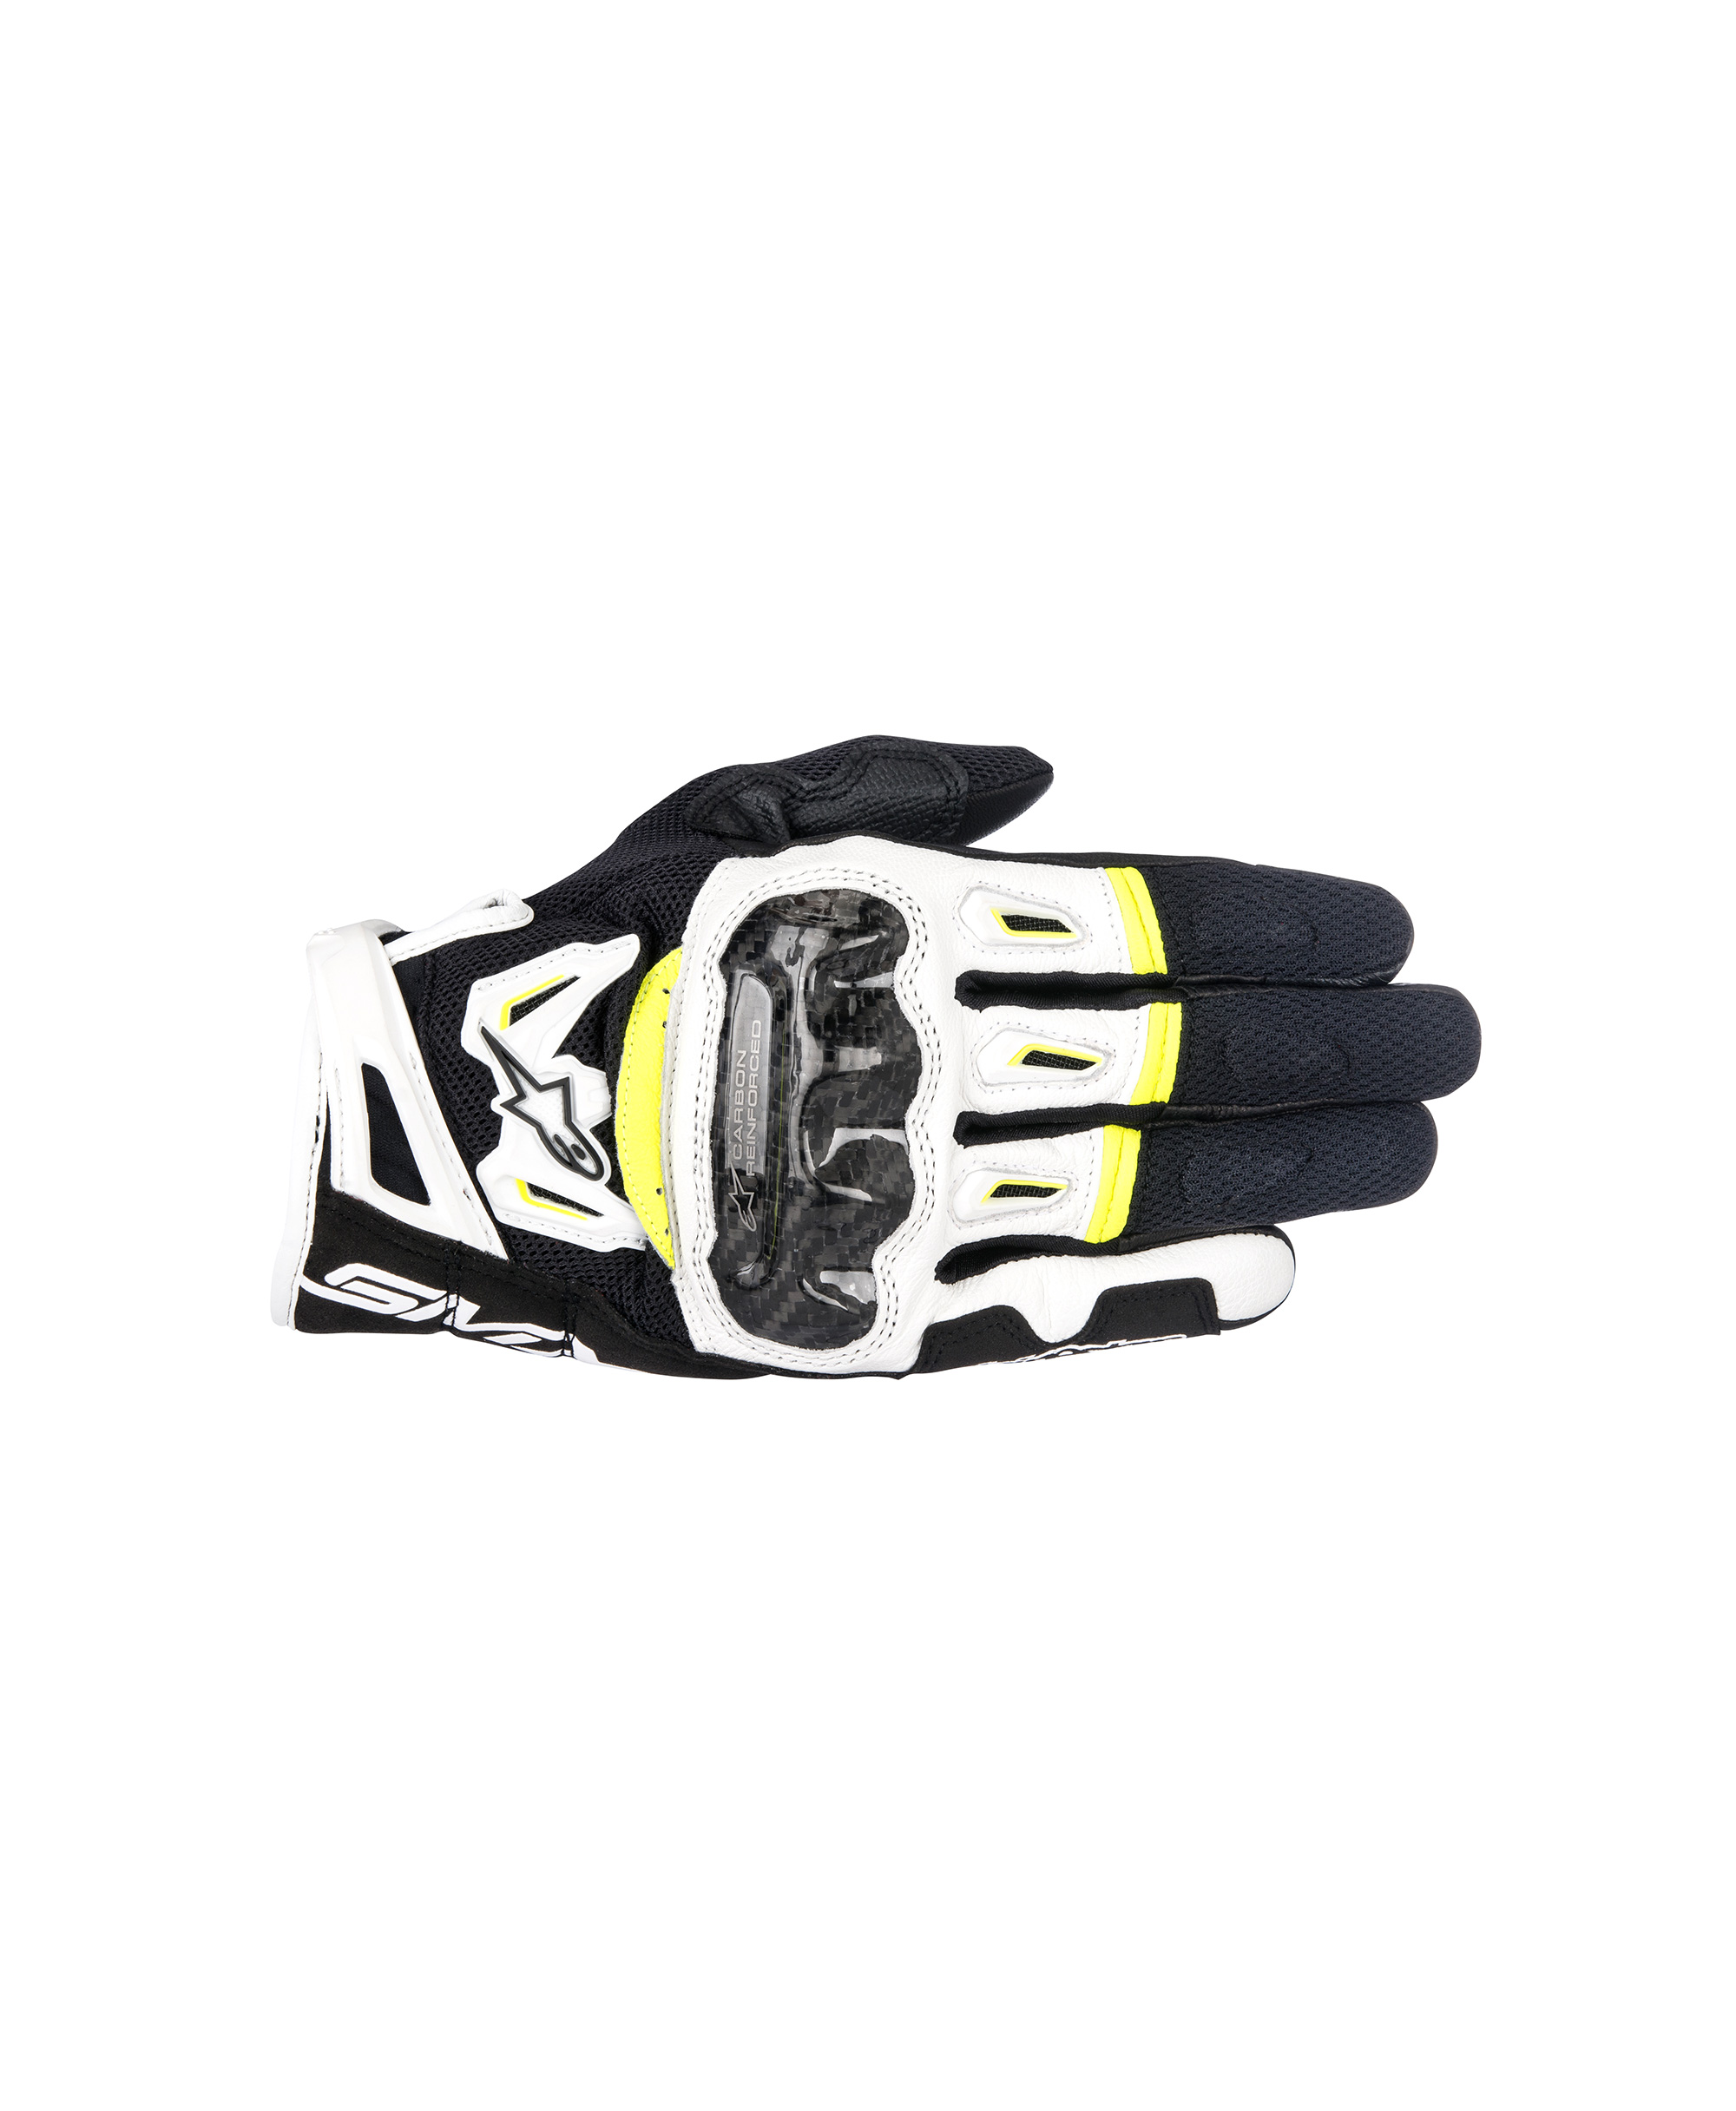 SMX-2 AIR CARBON V2 GLOVE BLACK WHITE YELLOW FLUO